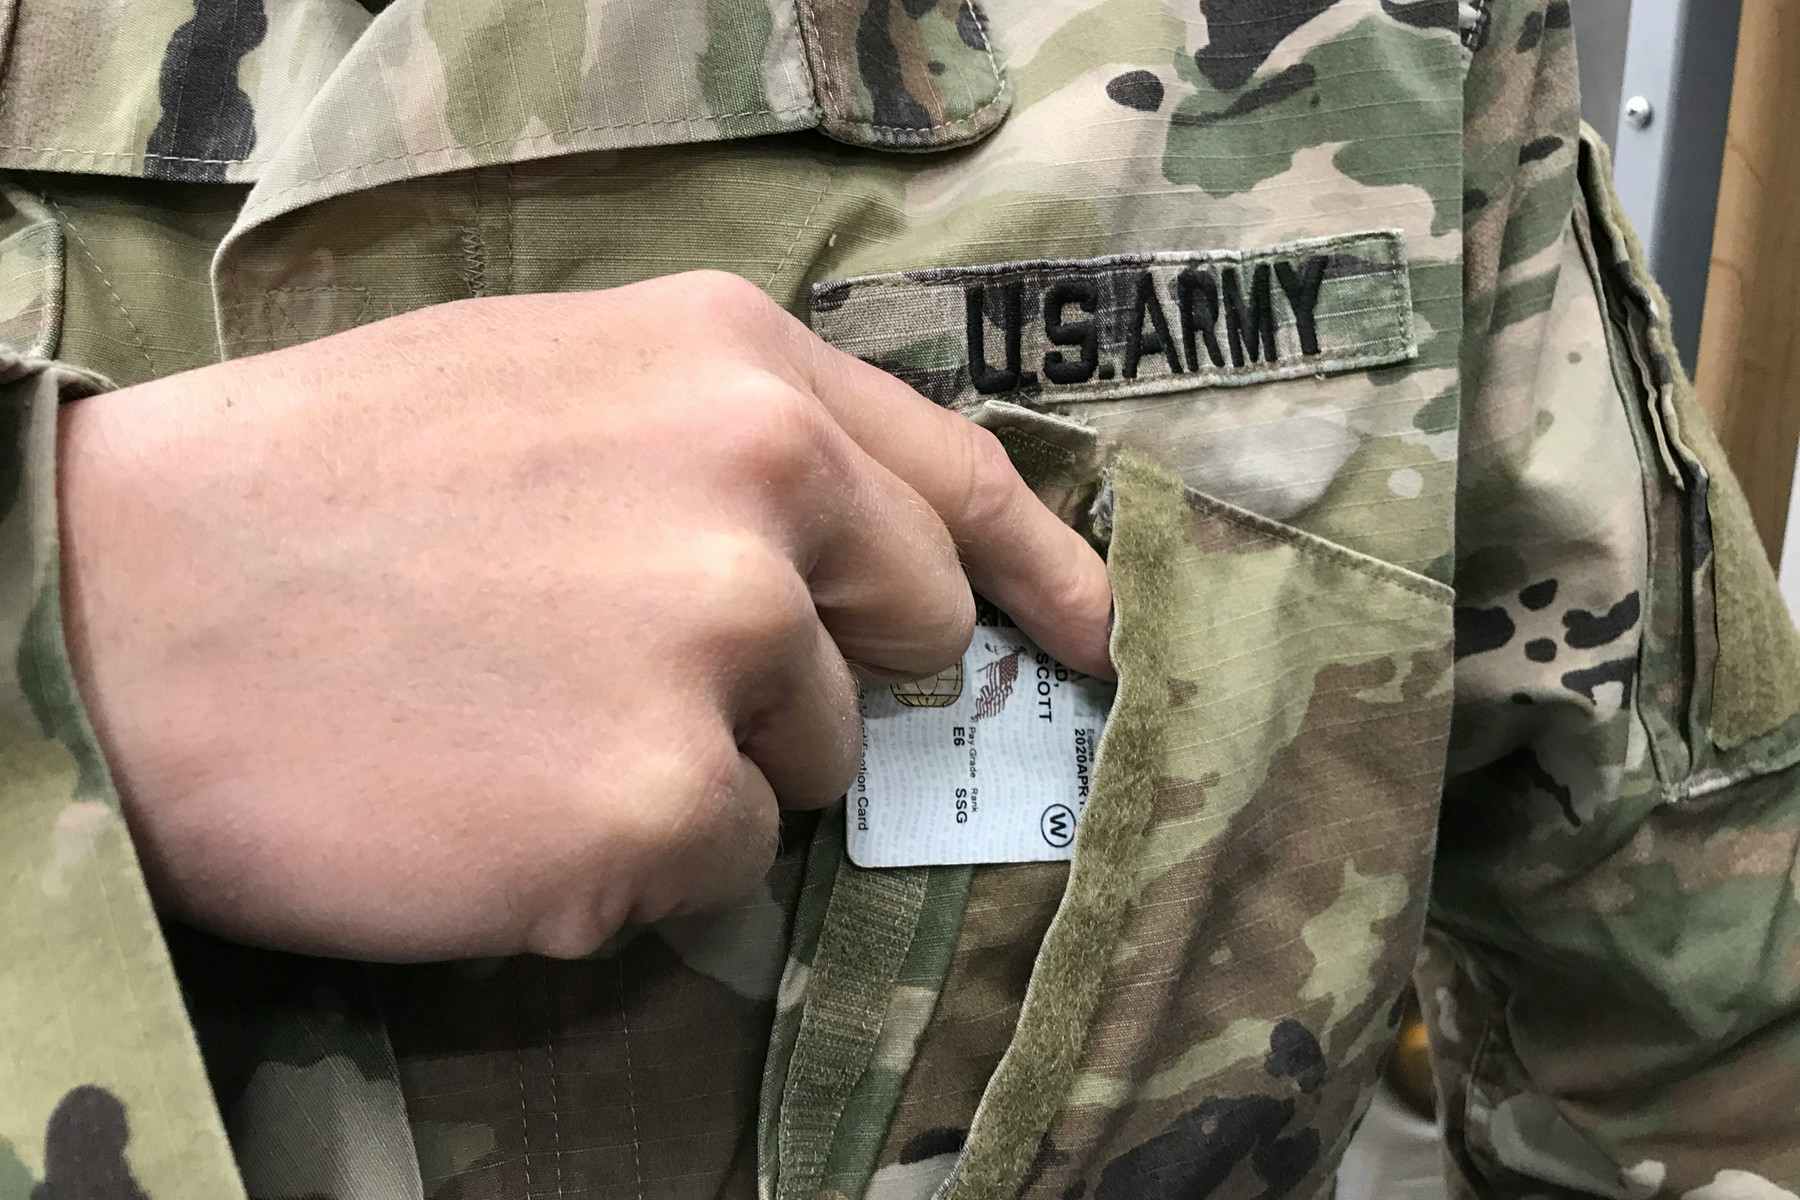 A person in US Army fatigues pulls a military ID from their front shirt pocket